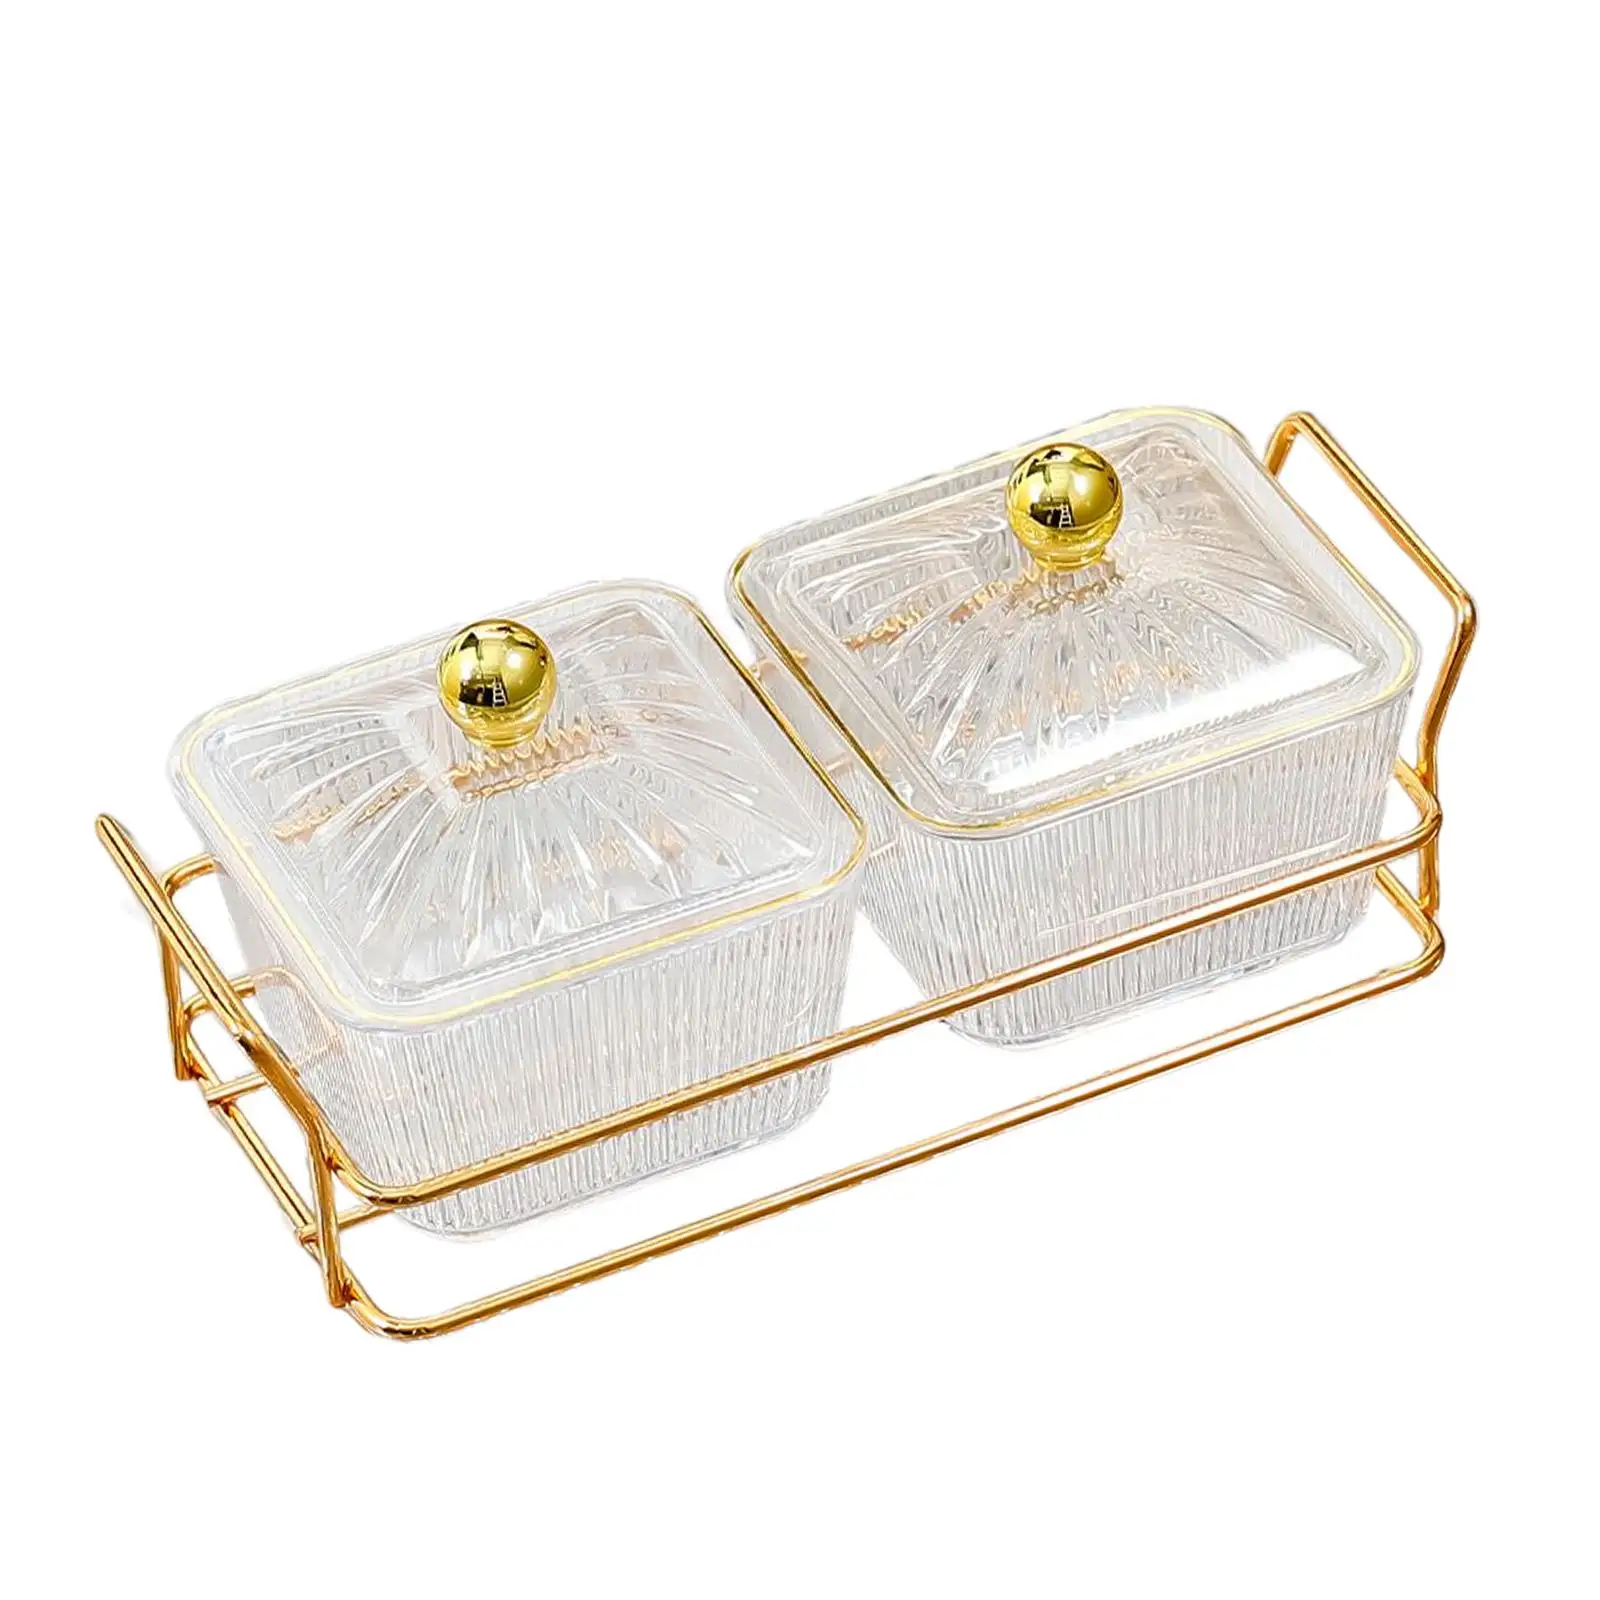 Divided Serving Platter Dried Fruit Plate Food Storage Box Candy Dish Platter Multifunction Snack Serving Tray Organizer